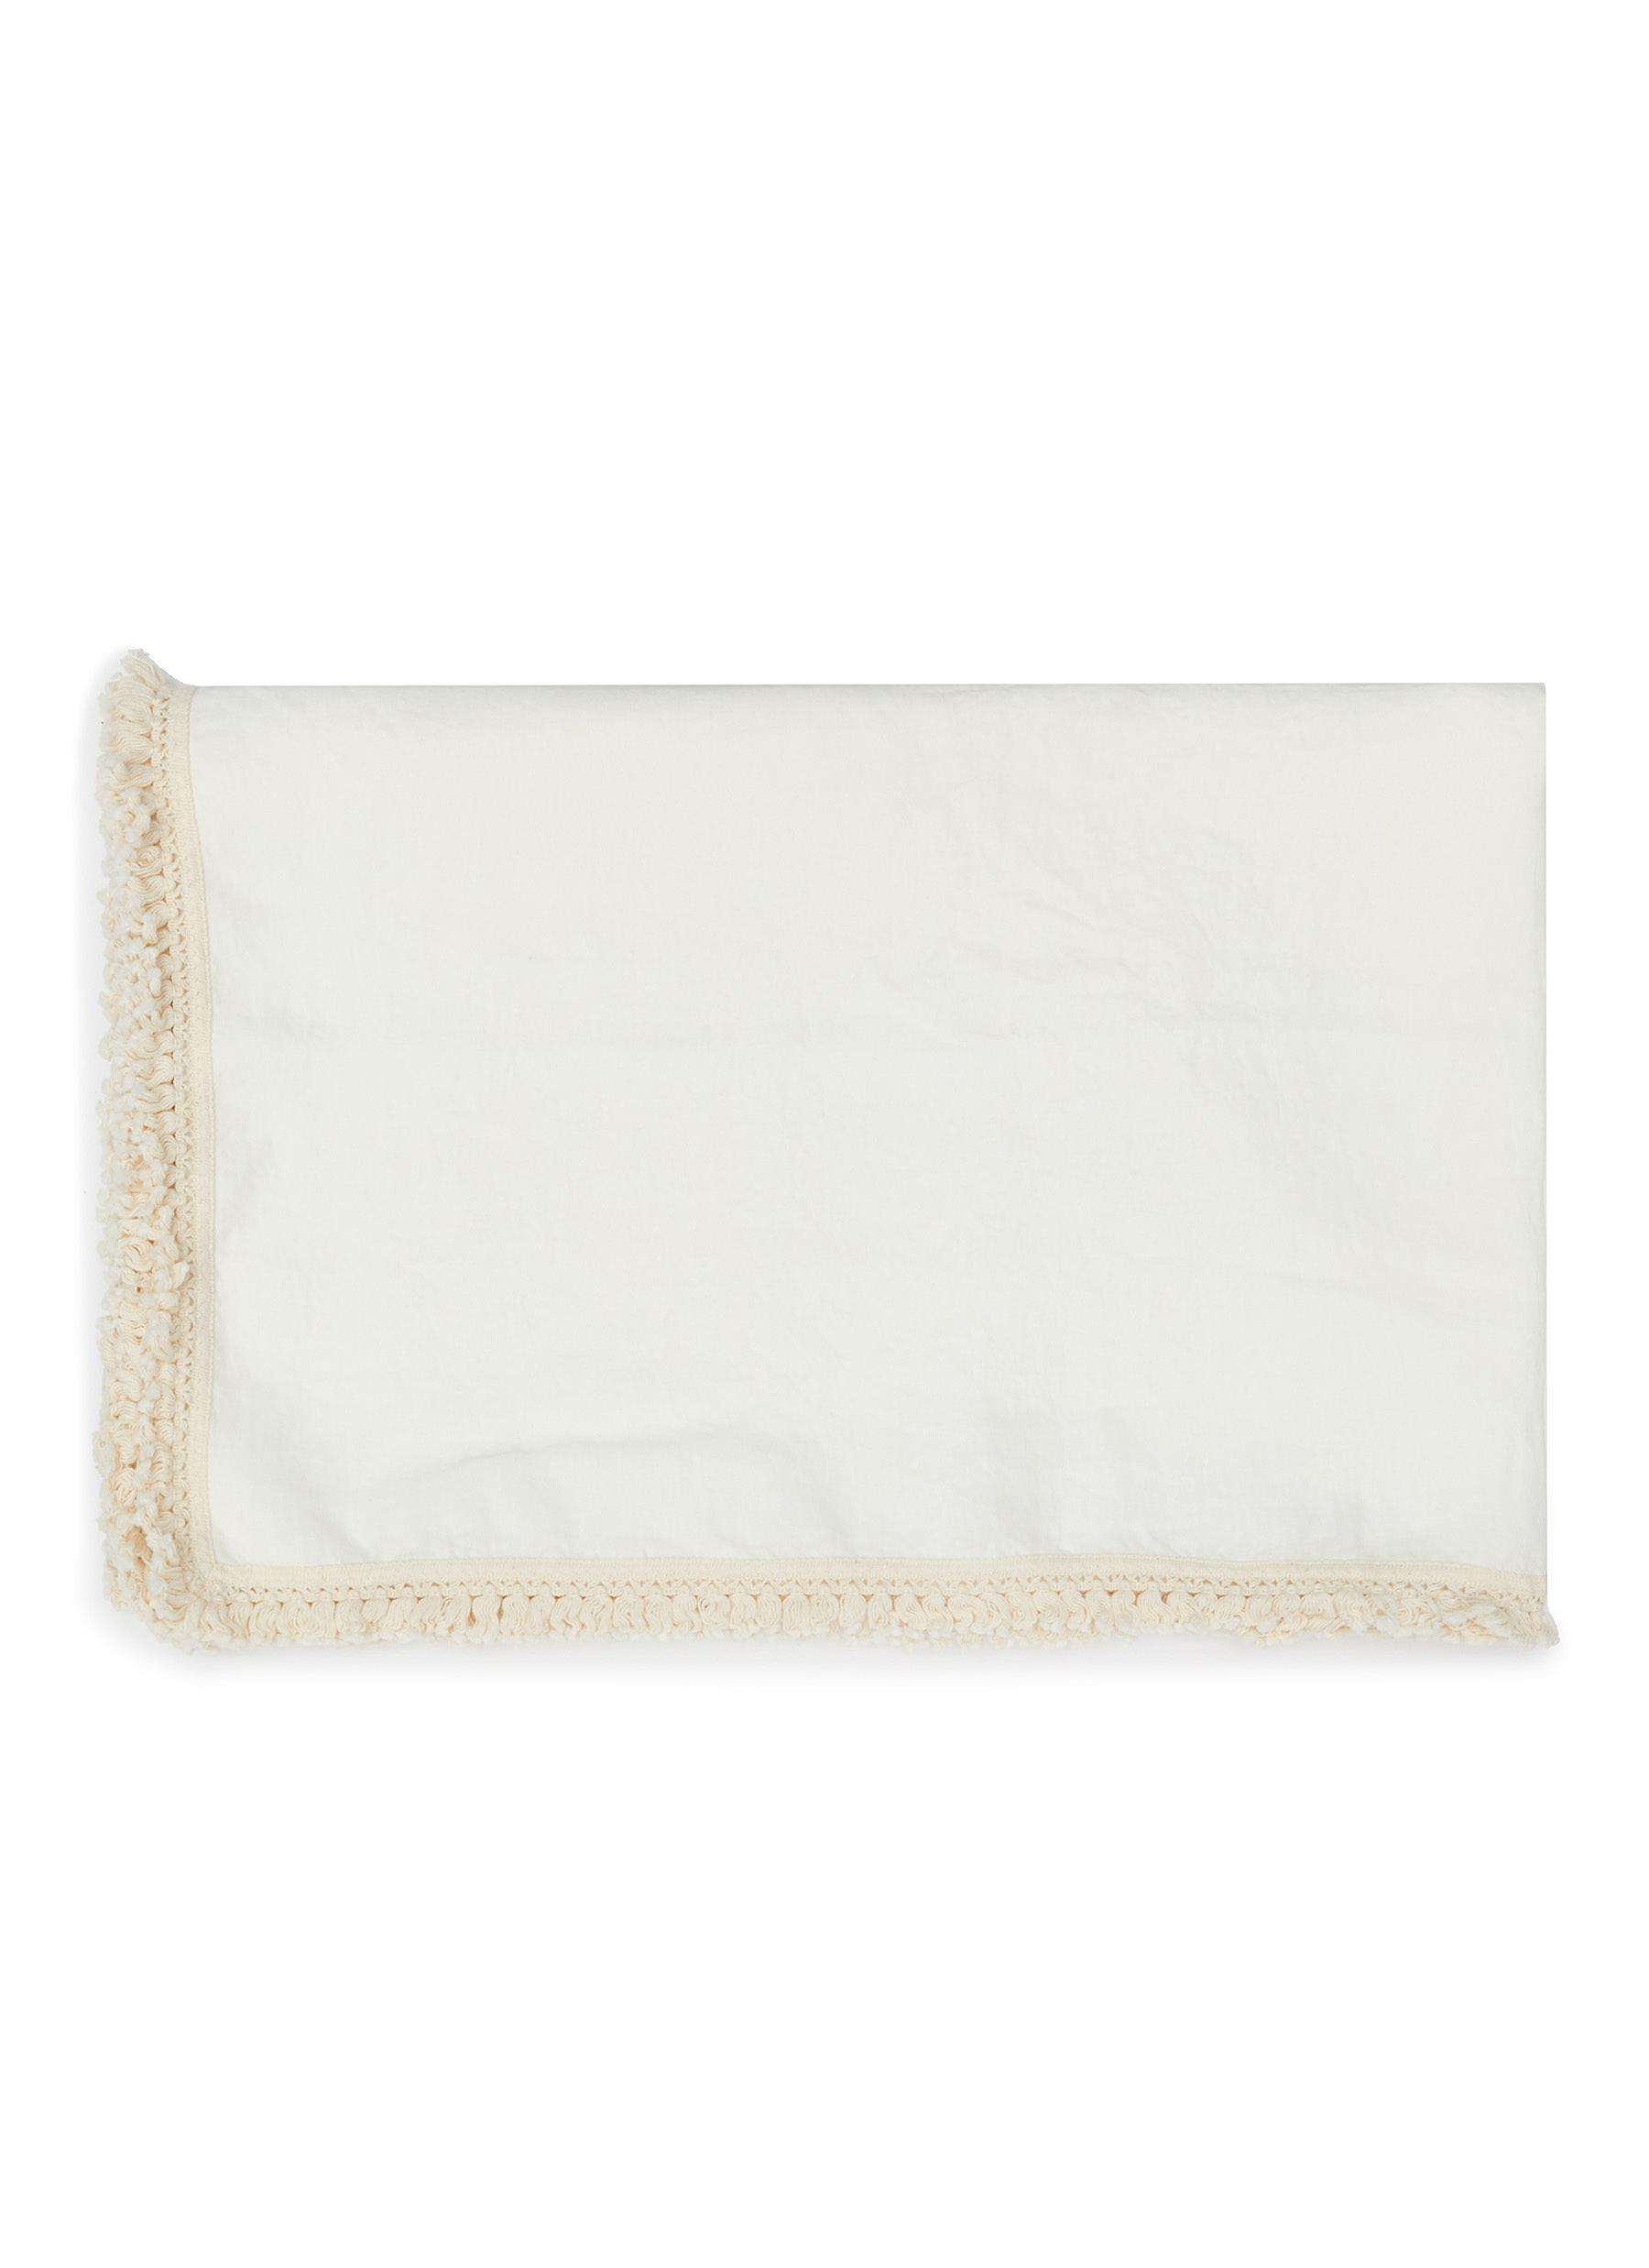 Medium Linen Tablecloth with Large Border - White